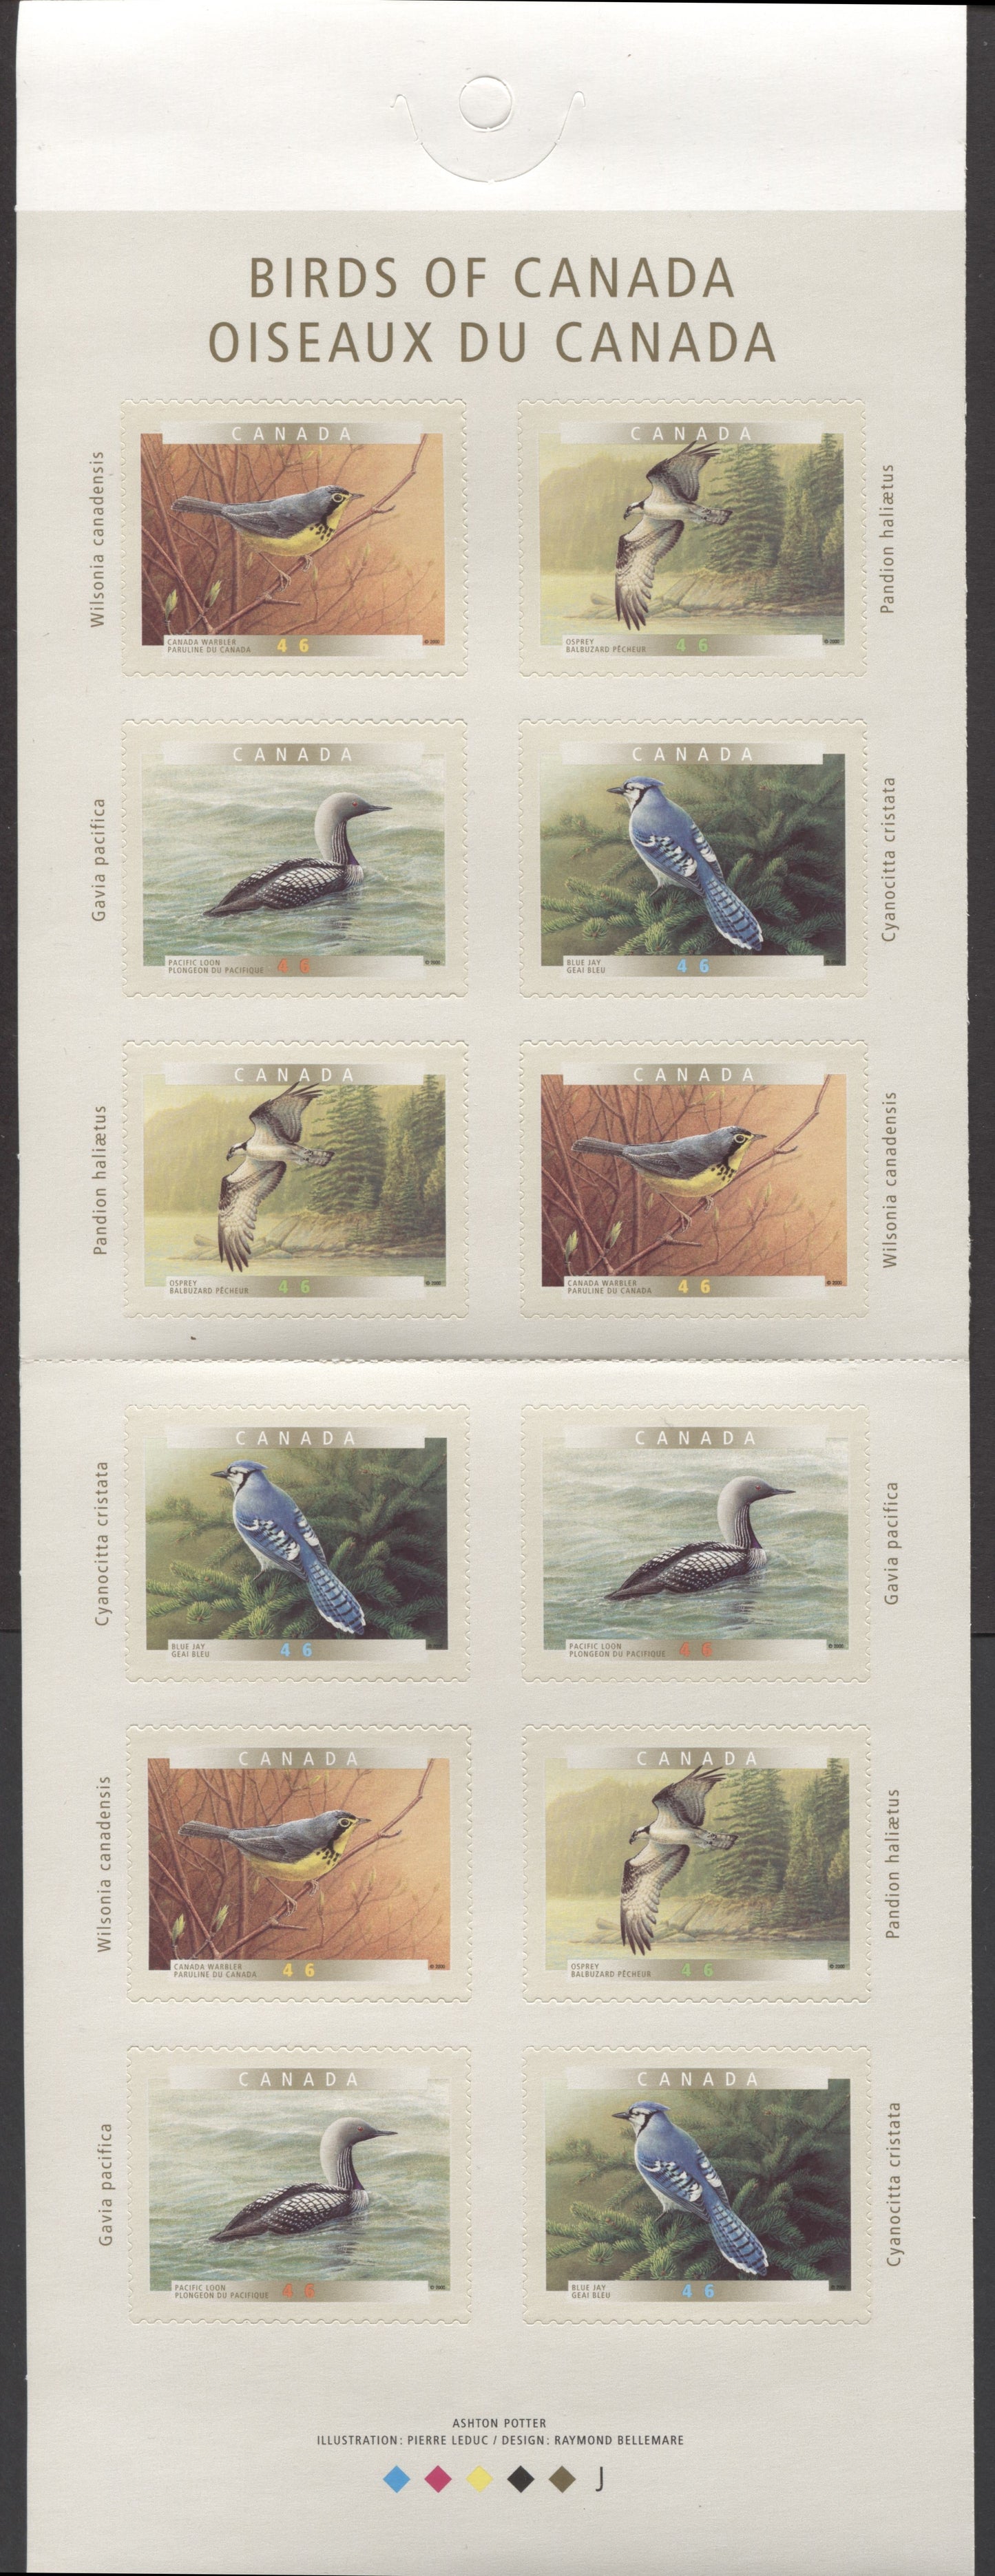 Canada #BK225a-b 2000 Birds of Canada Issue, Complete $5.52 Booklet, JAC Paper, Dead Paper, 4 mm GT-4 Tagging